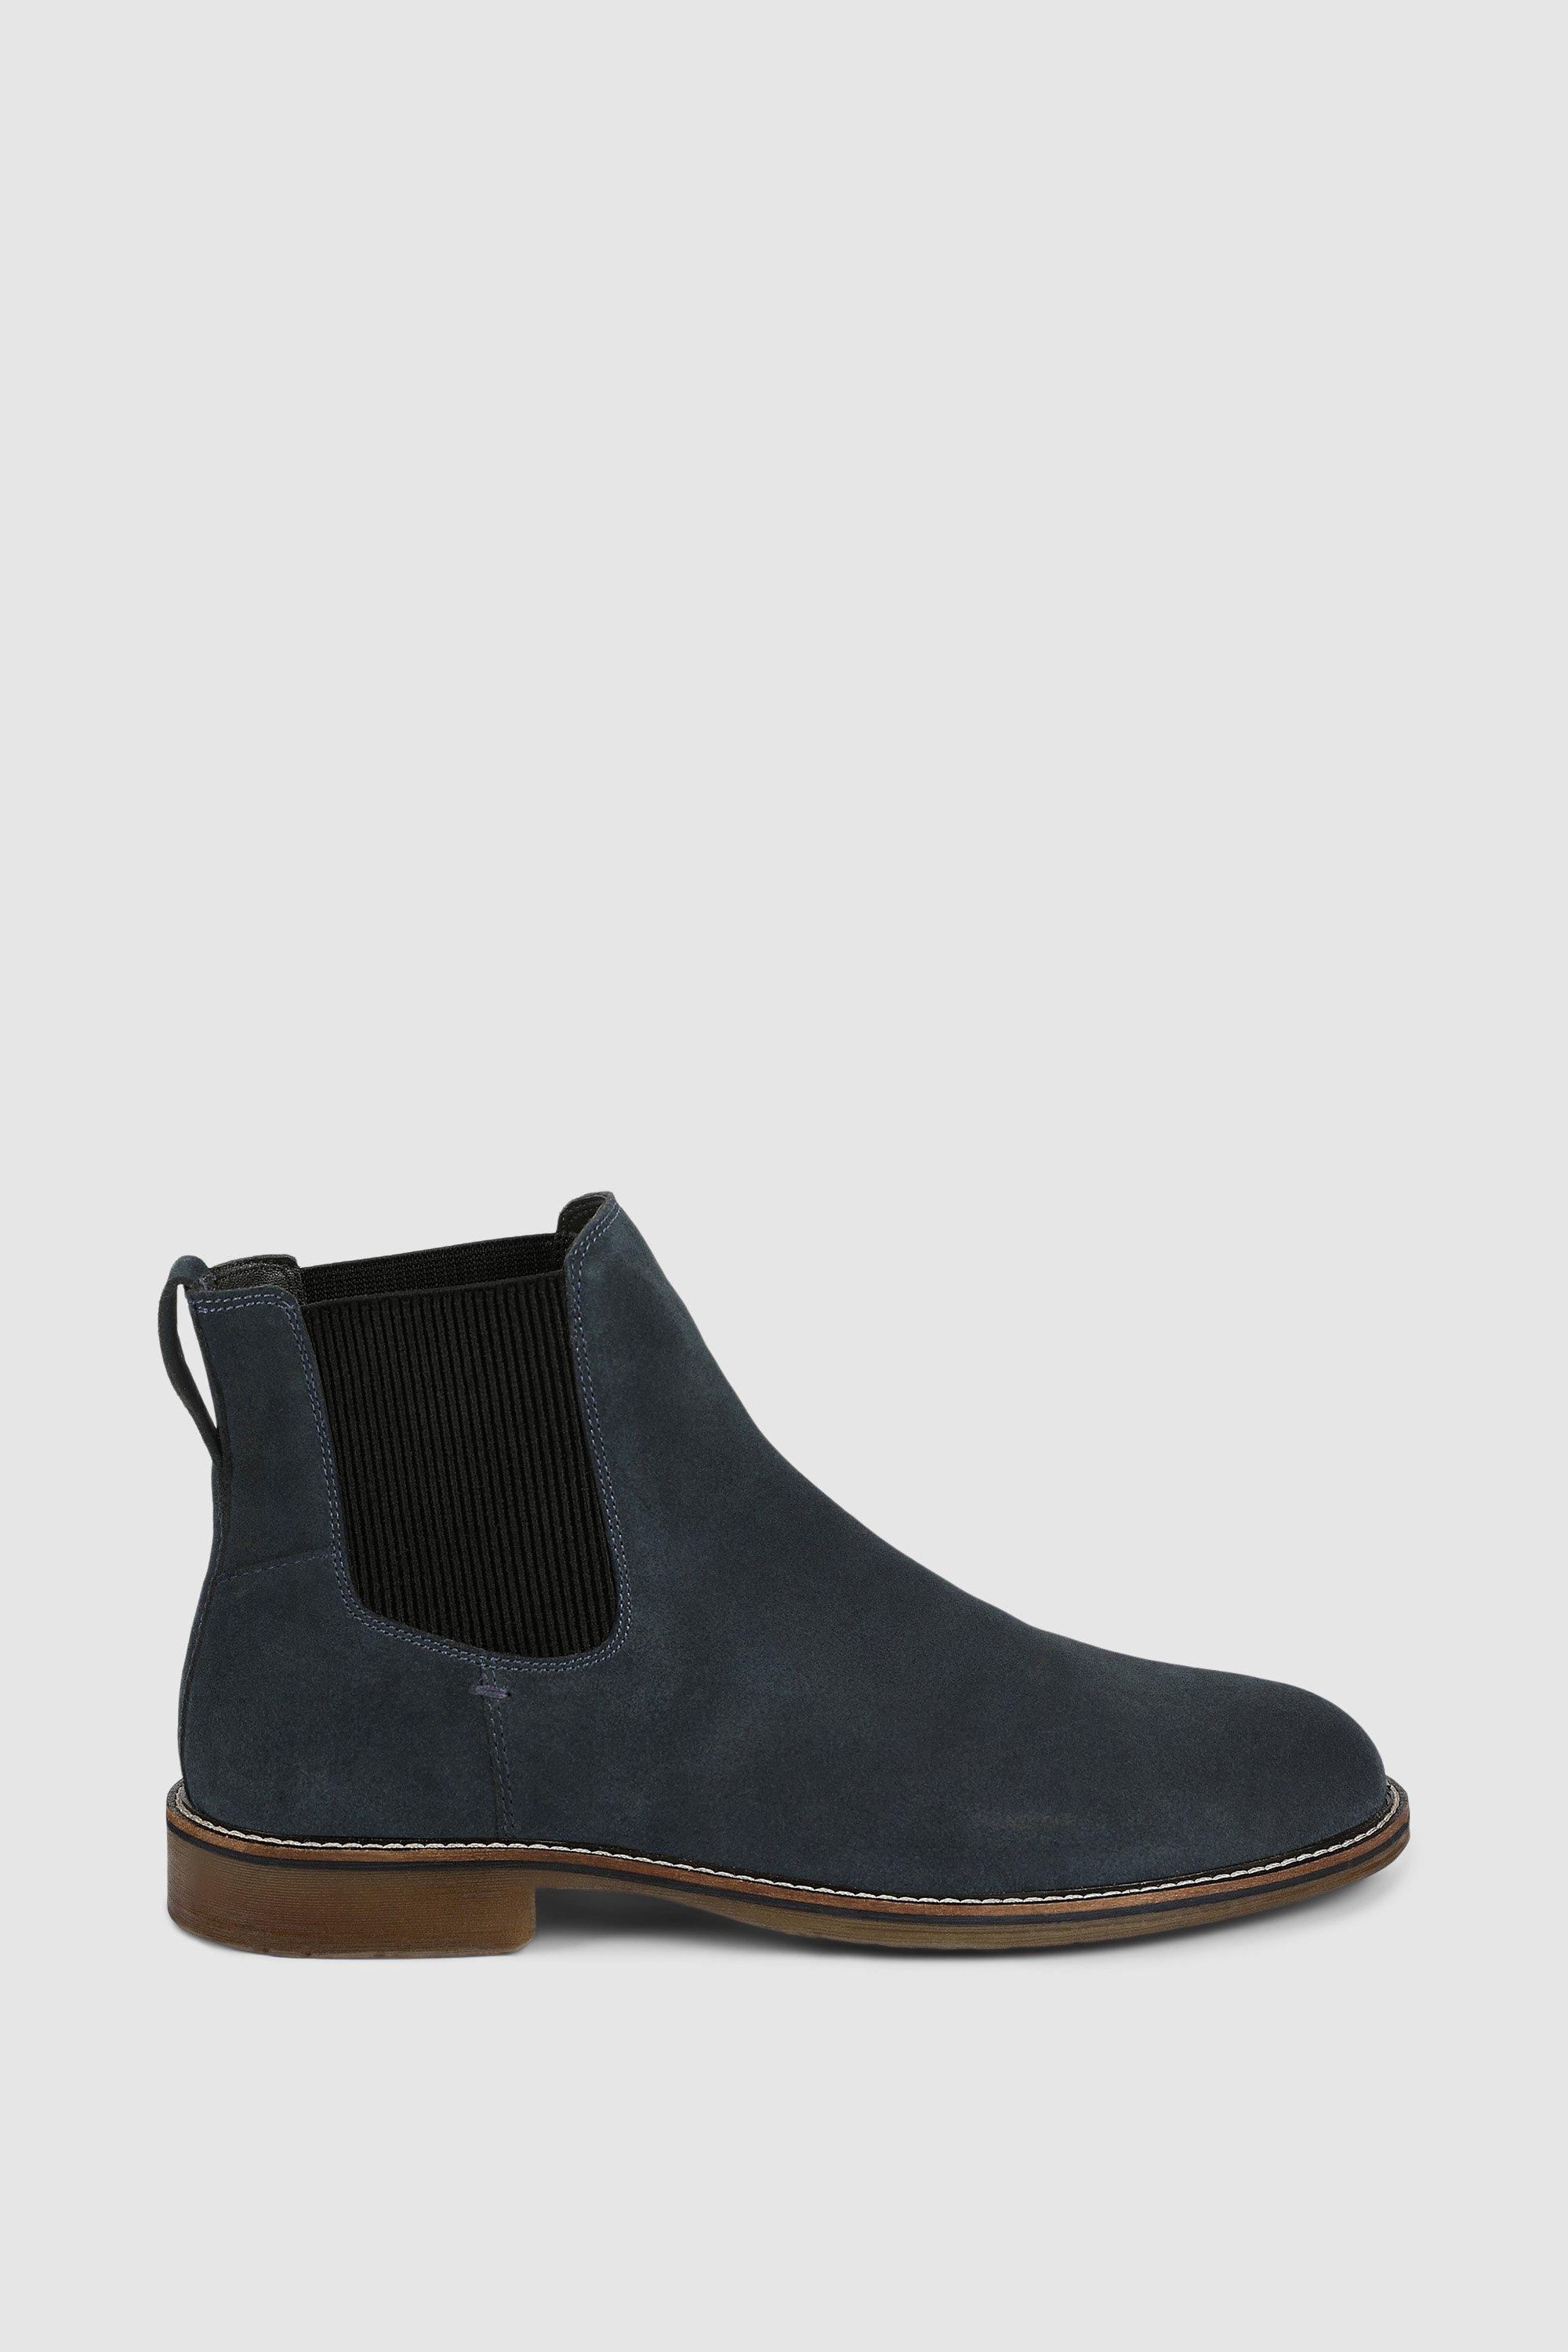 Boots | Heritage Casual Suede Chelsea Boot | Mantaray